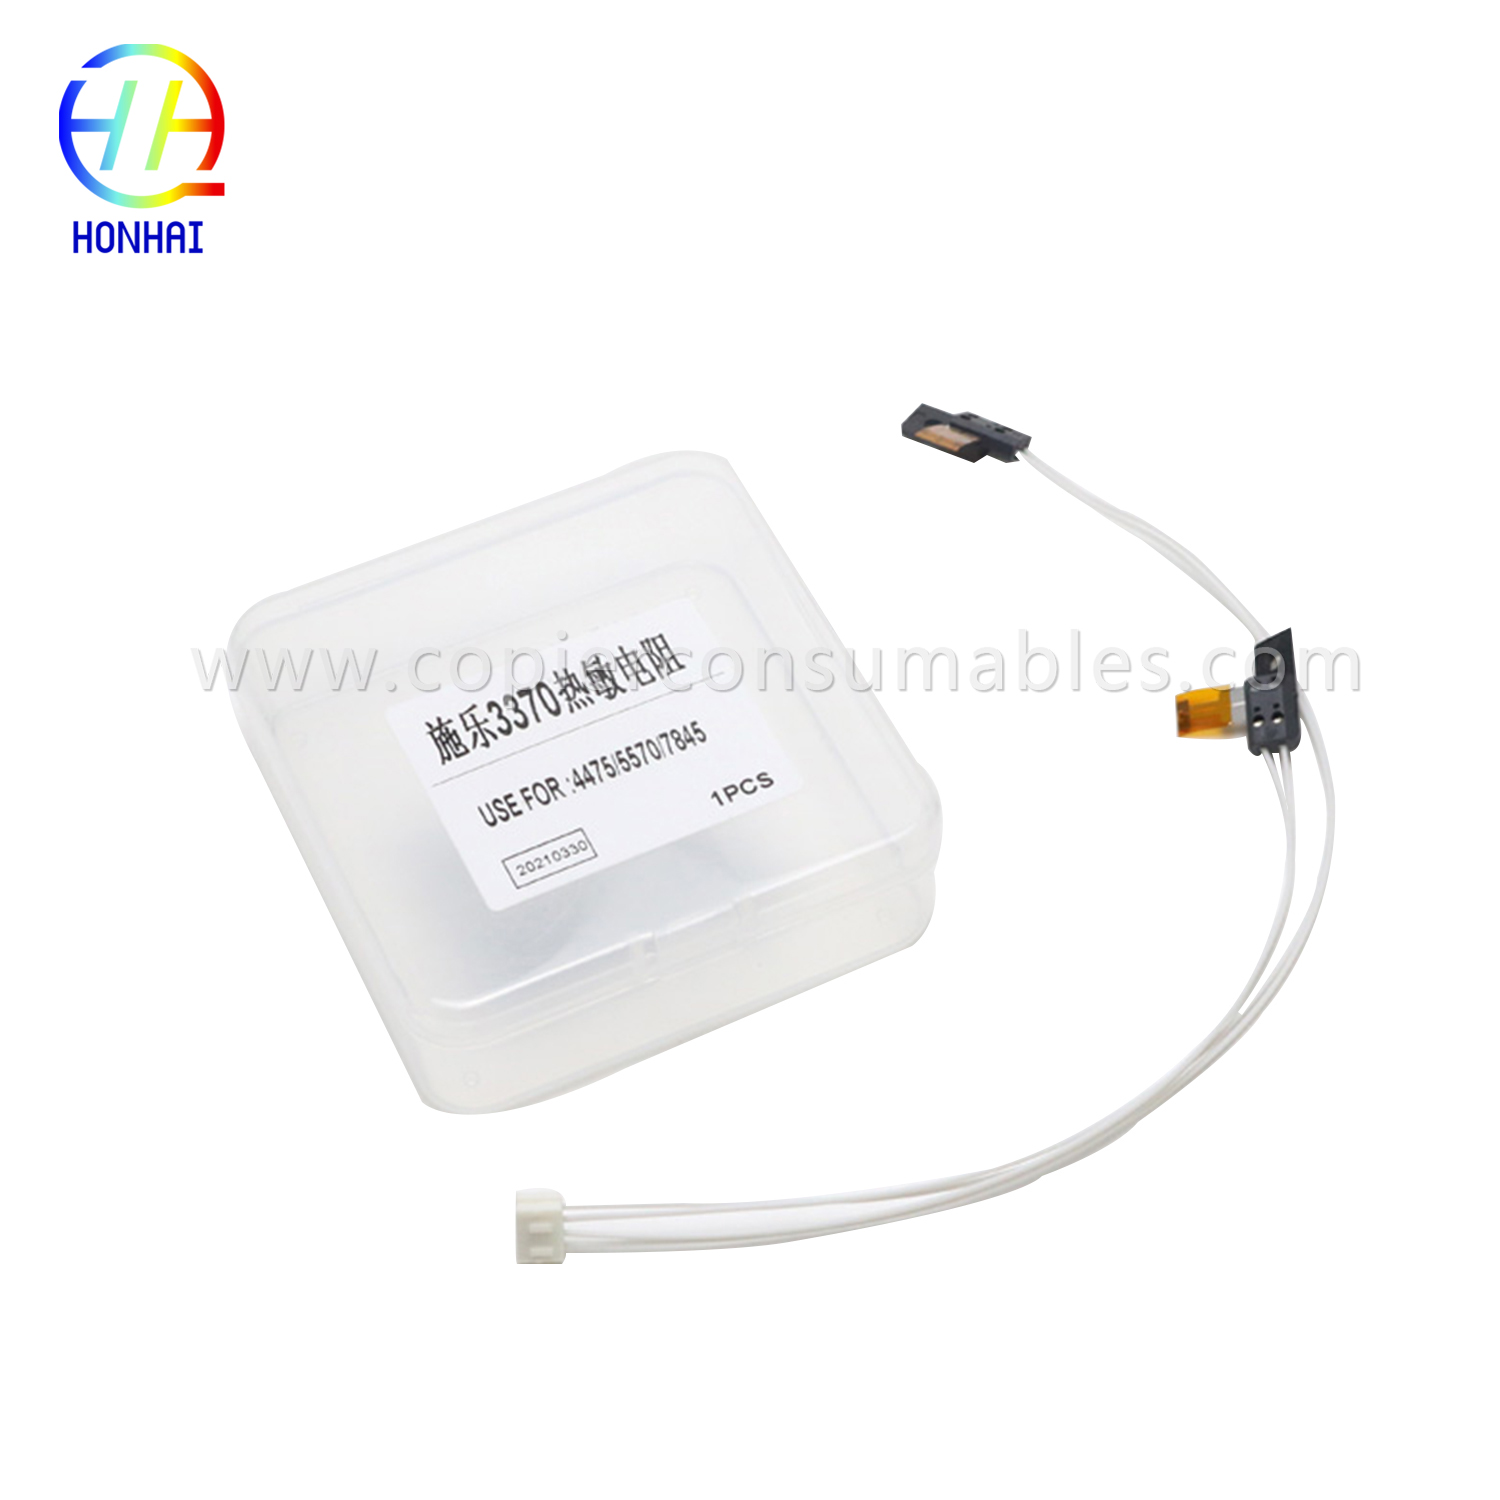 Fuser Unit Thermistor for Xerox P4 3370 3375 3373 7830 7835 7845 7855 7525 7535 7545 7556 4470 4475 5570 5575 Original Disassembly Accessories